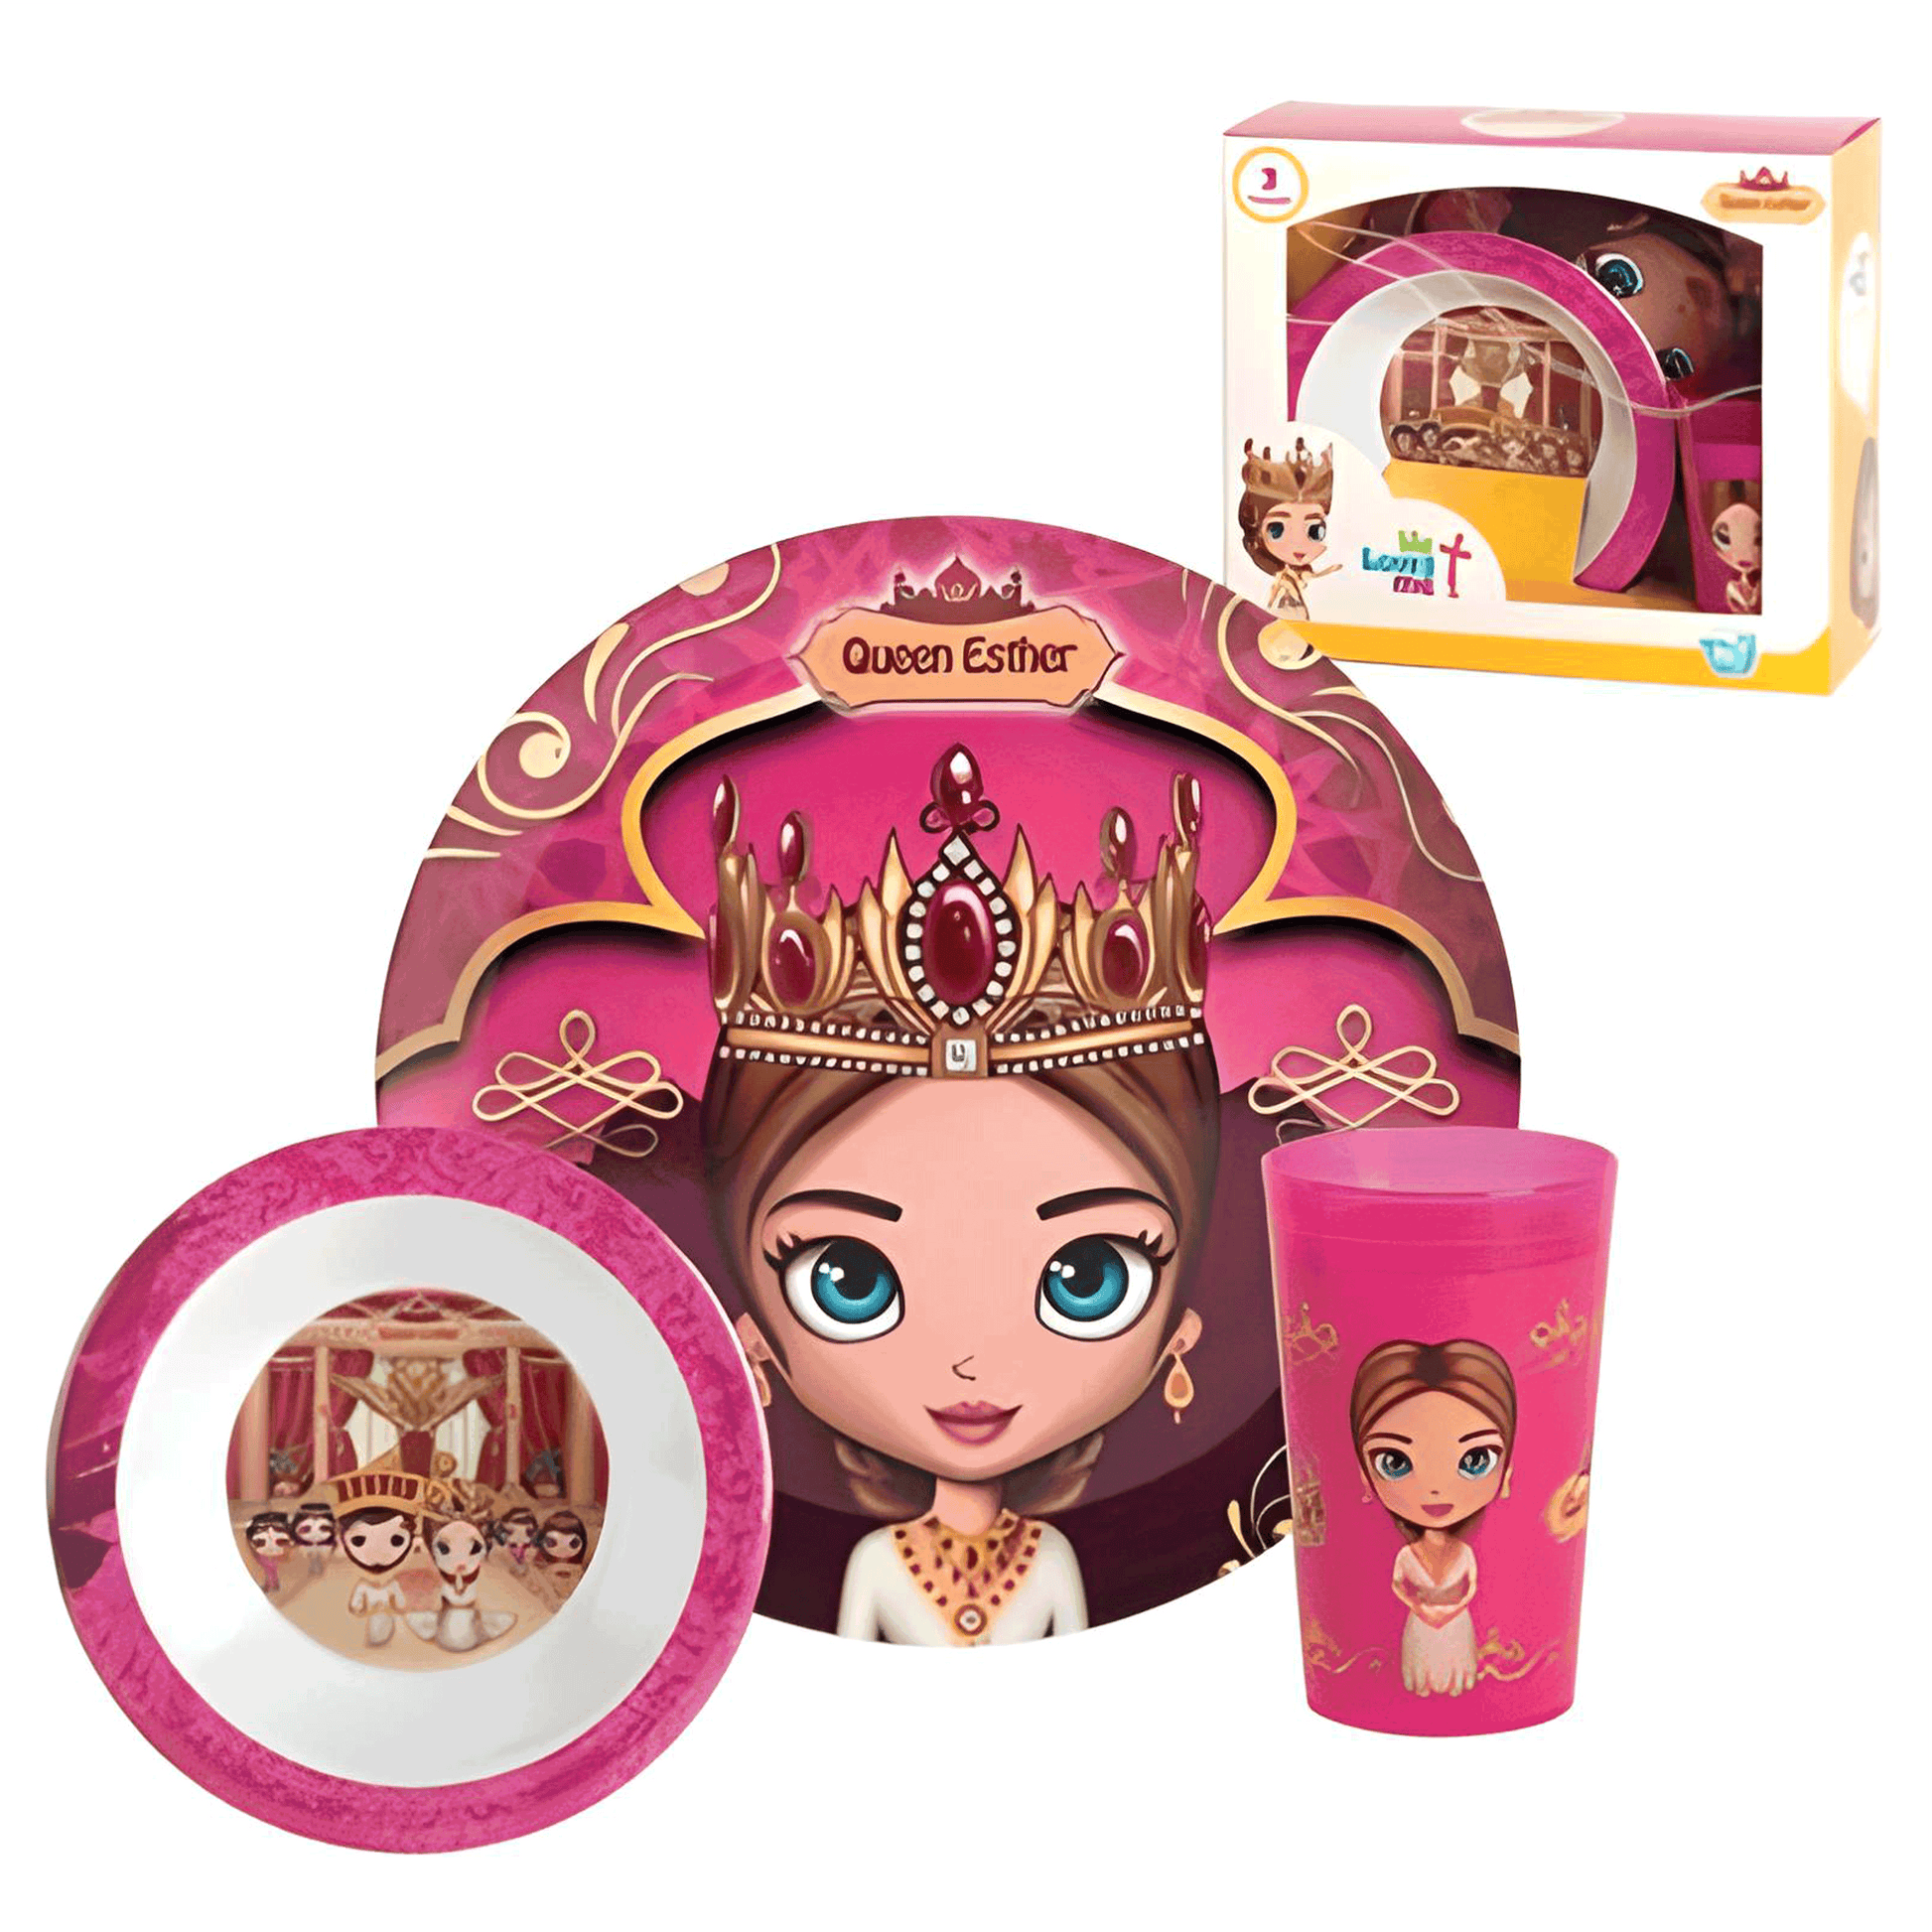 Children's toy dish set with queen Esther theme 